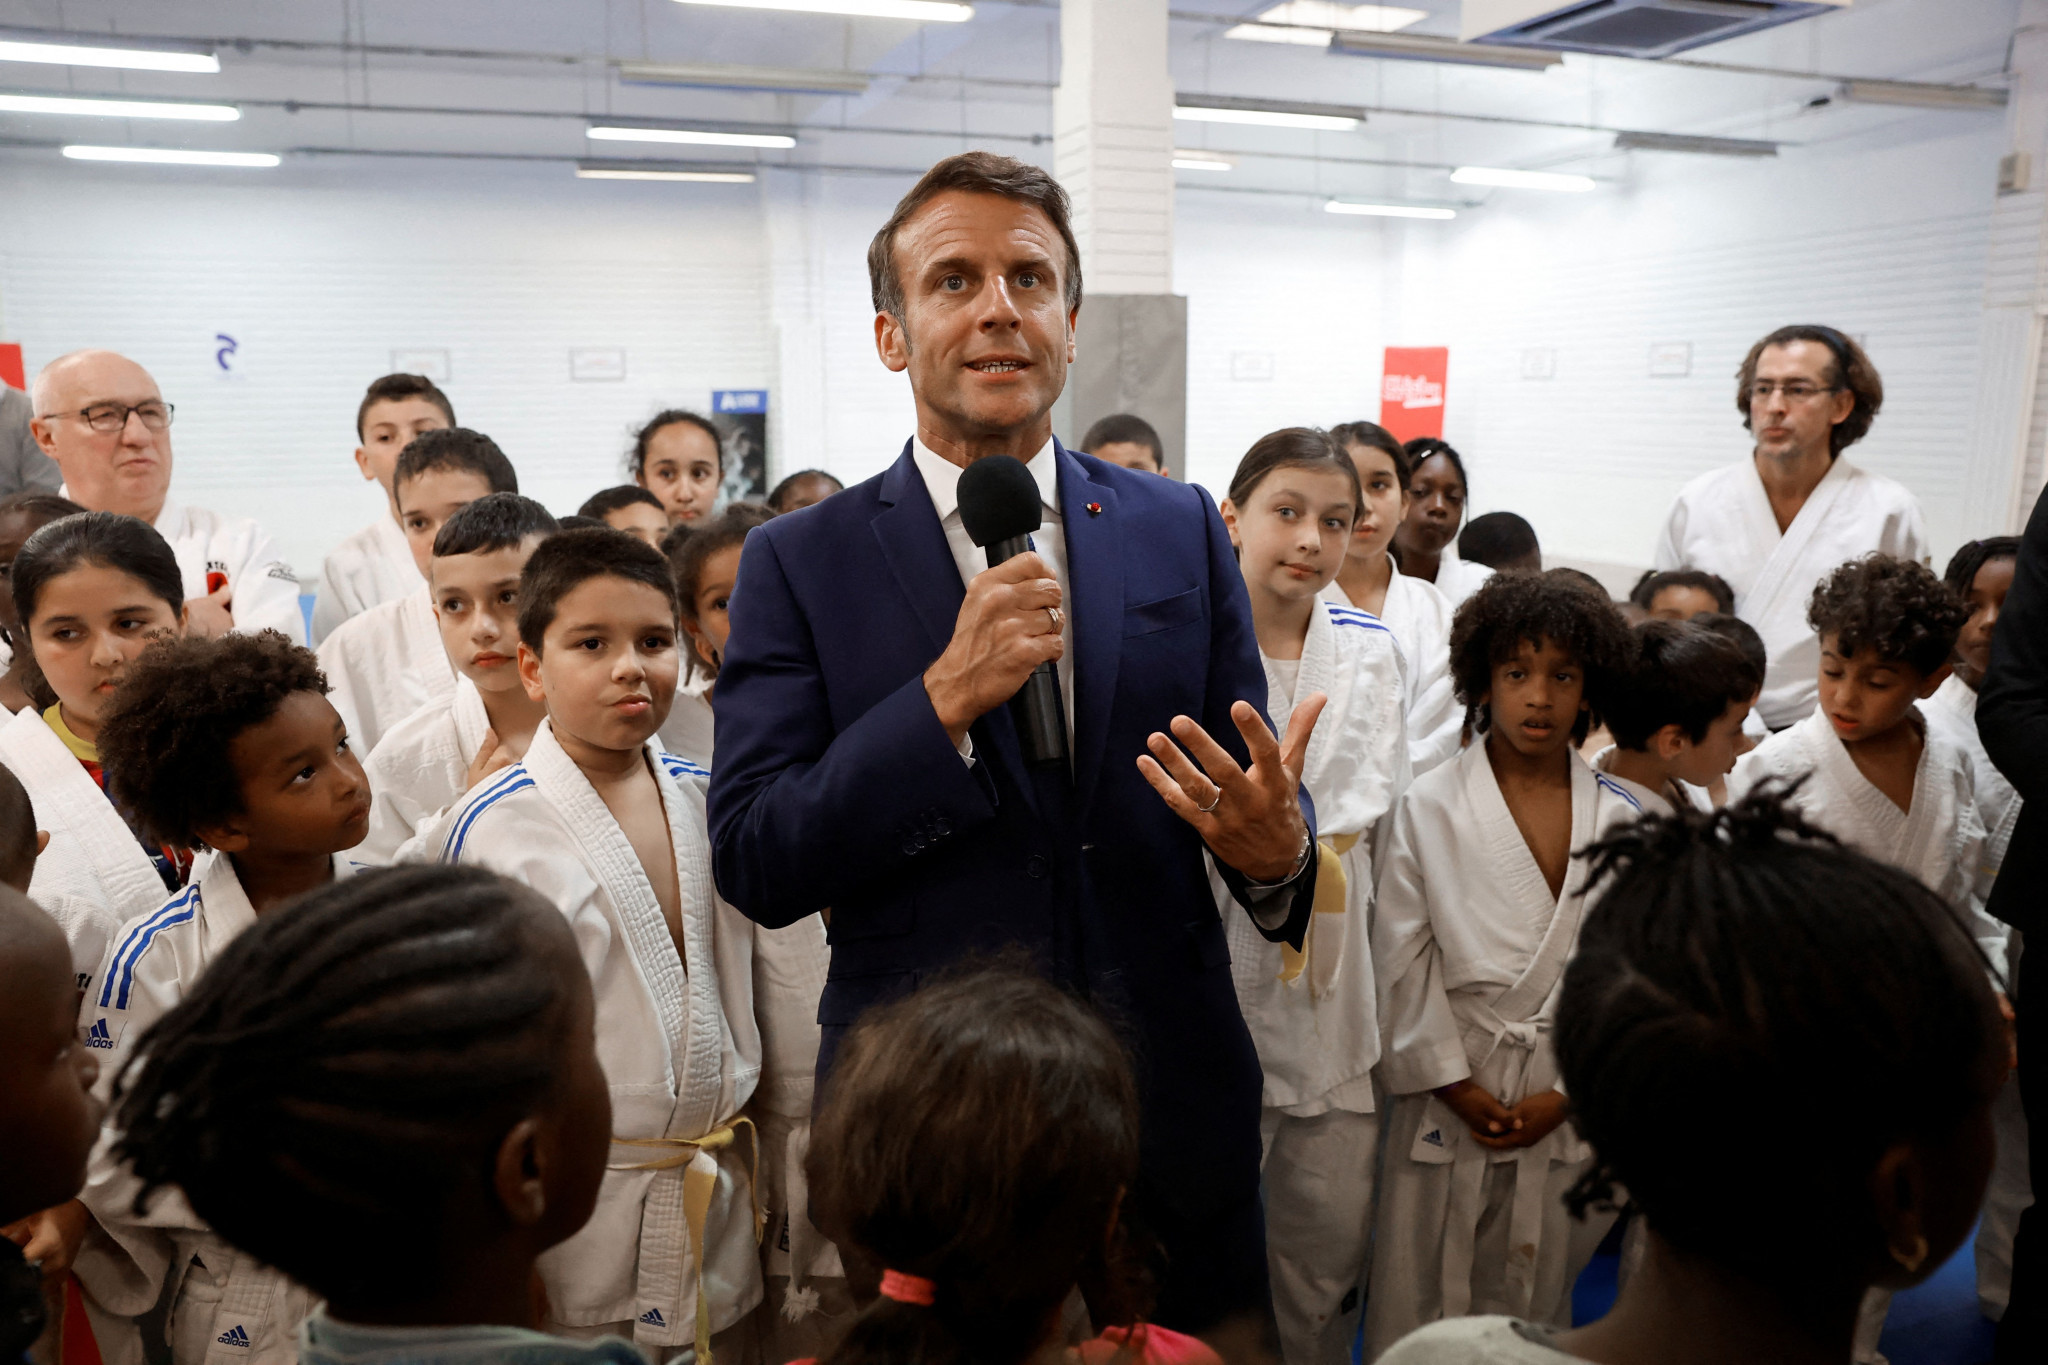 French President Emmanuel Macron attended the opening of a dojo in a shopping mall in Clichy-sous-Bois in June ©Getty Images